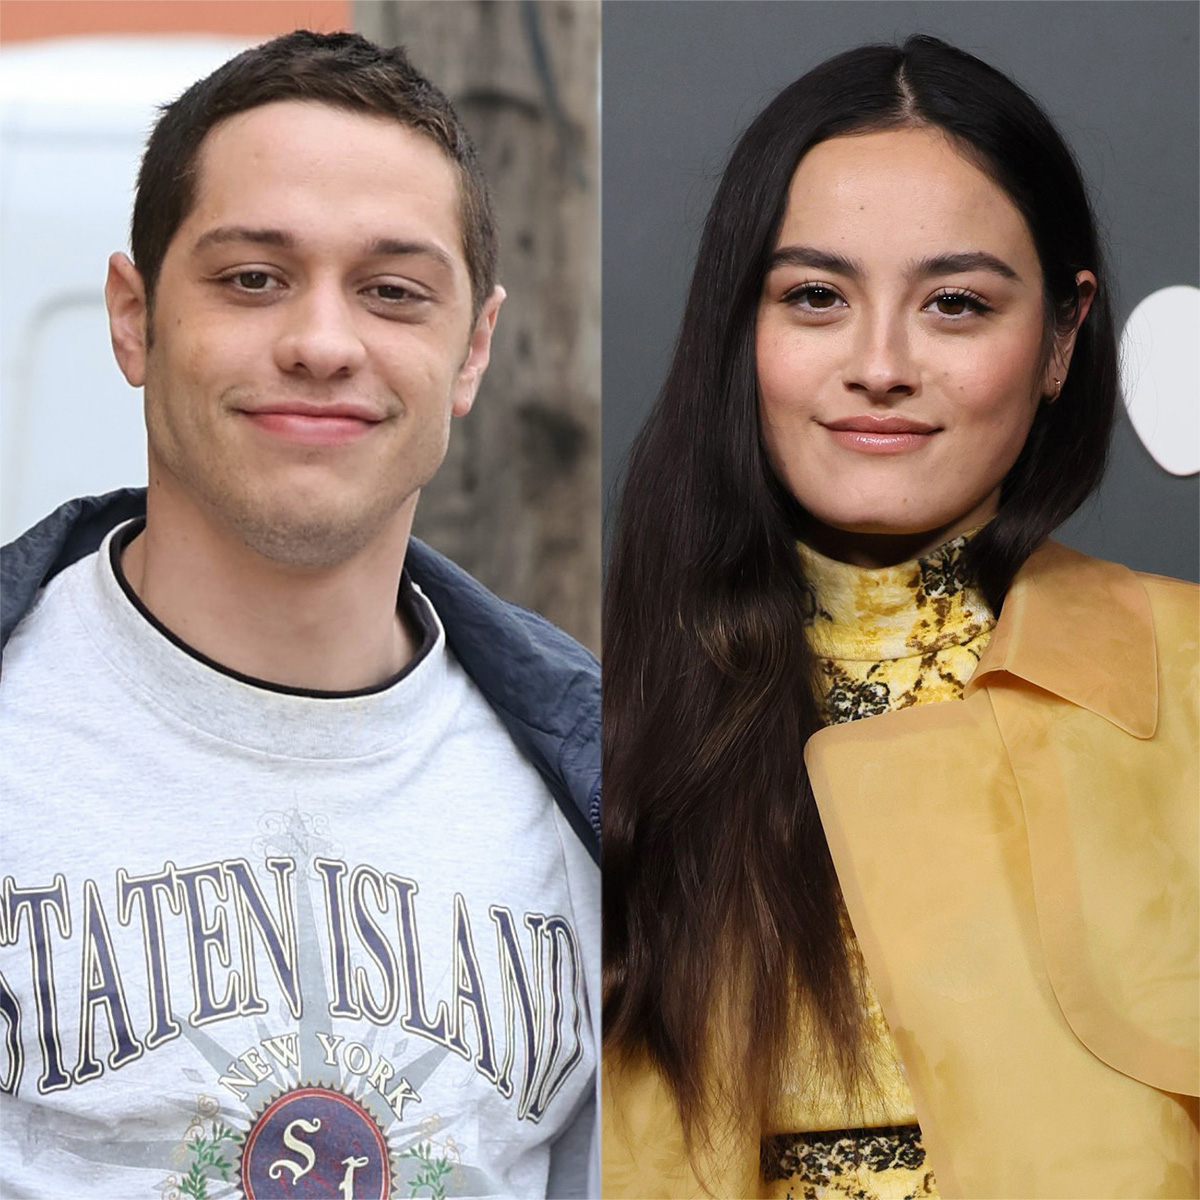 Pete Davidson & Chase Sui Wonders Seemingly Confirm Romance in PDA Pic